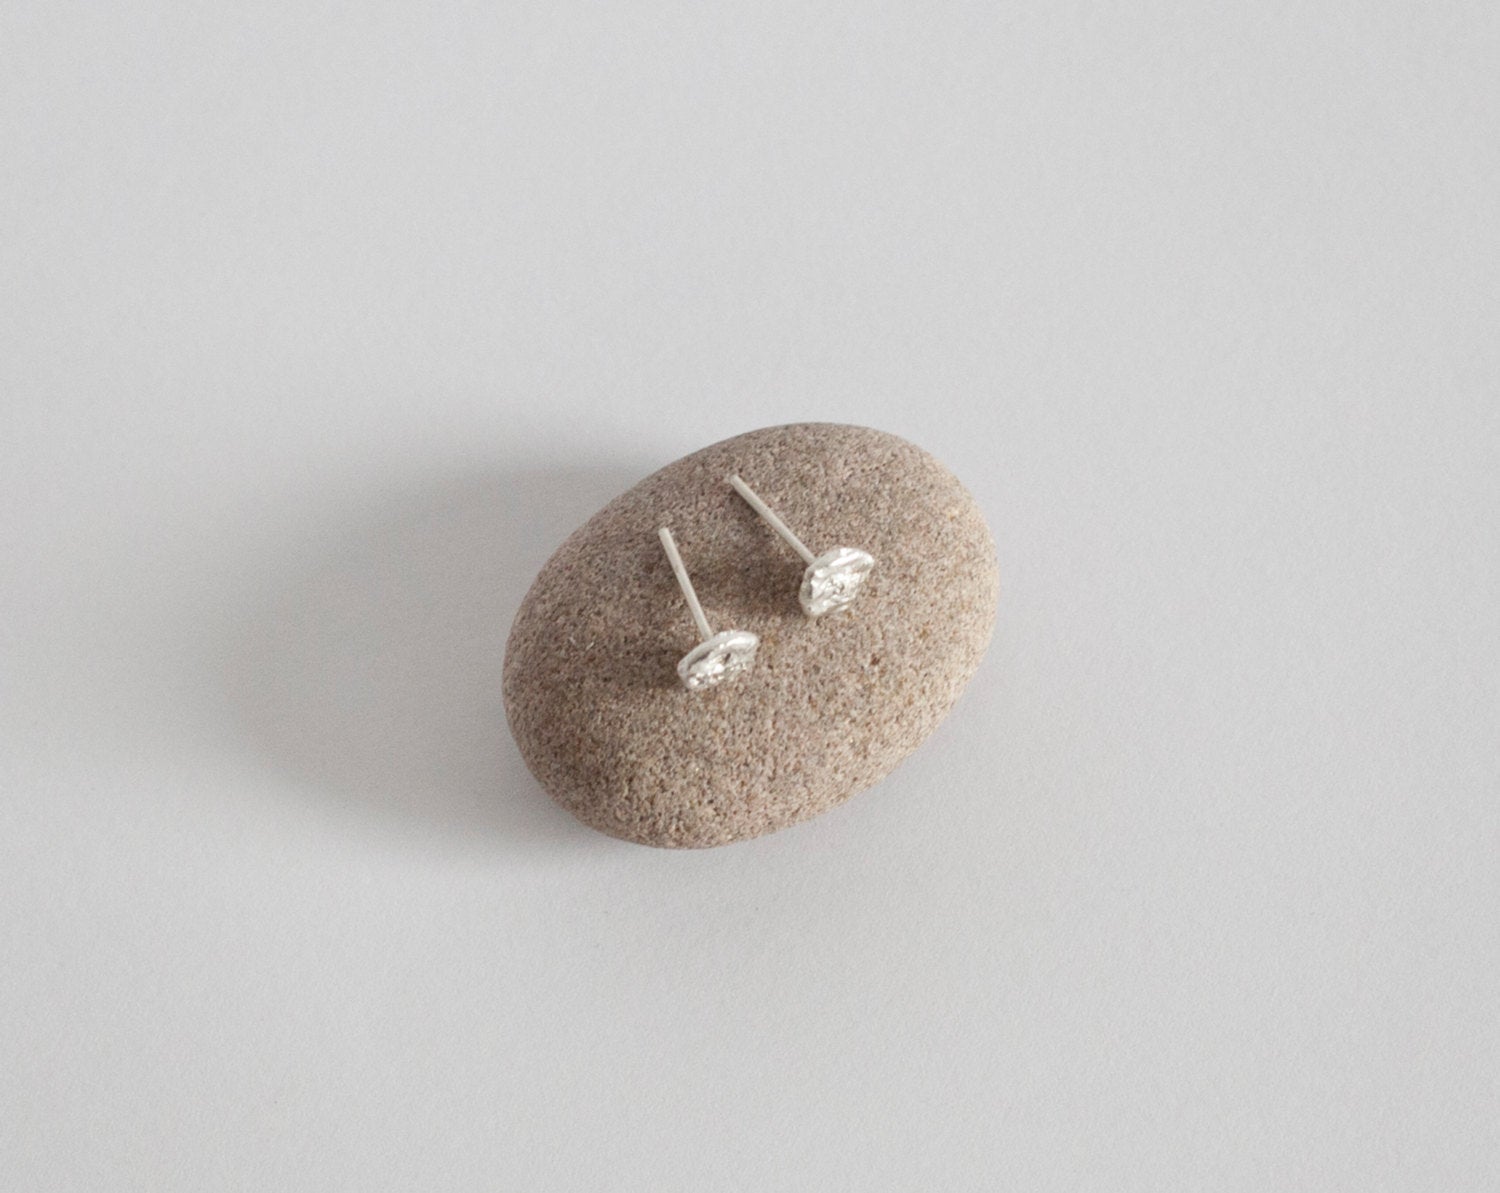 Tiny full moon stud earrings (small version)  (made to order)